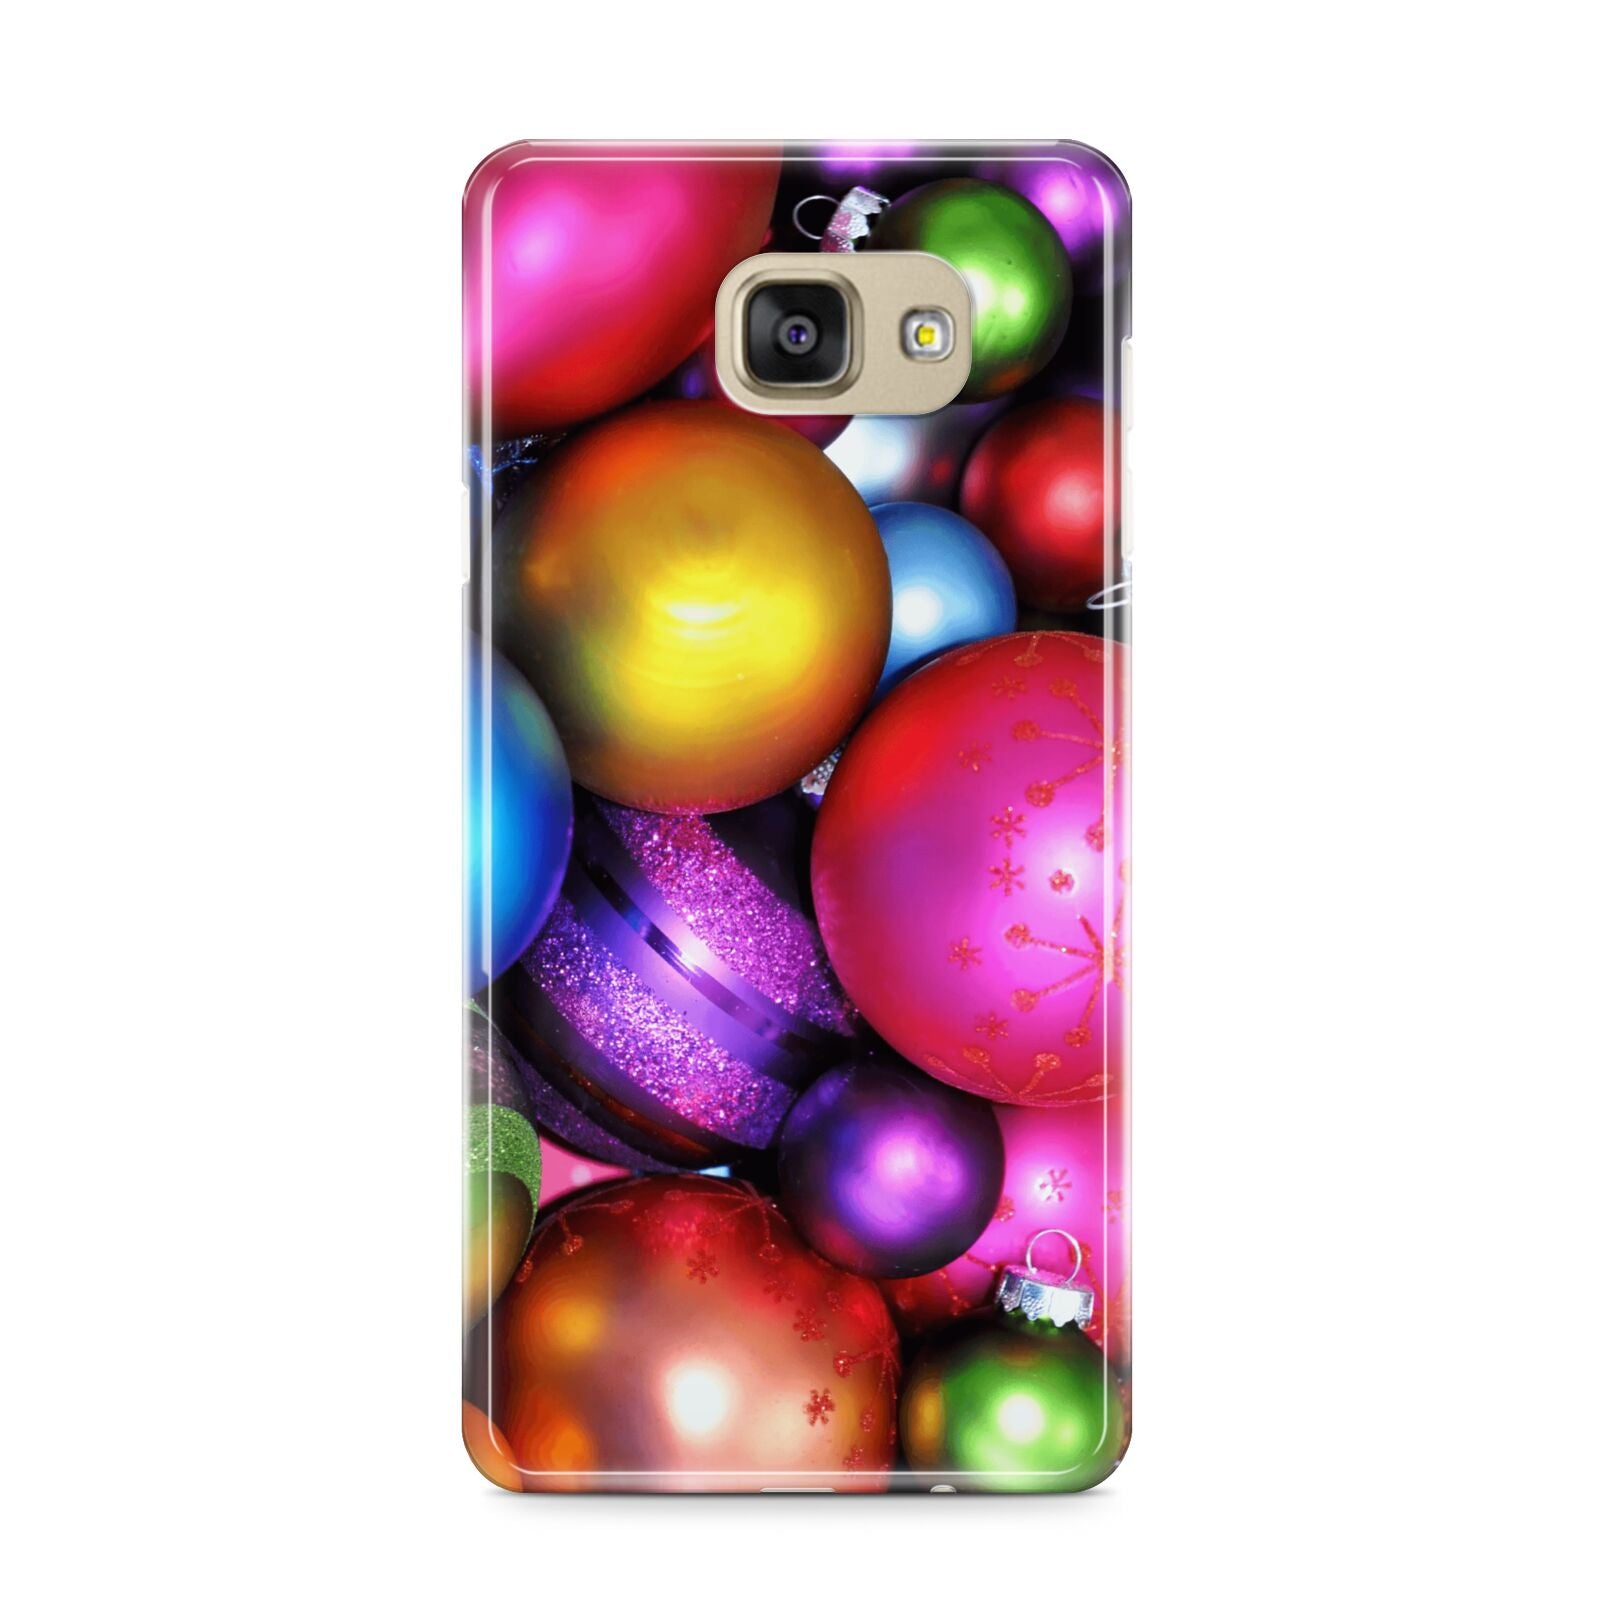 Bauble Samsung Galaxy A9 2016 Case on gold phone